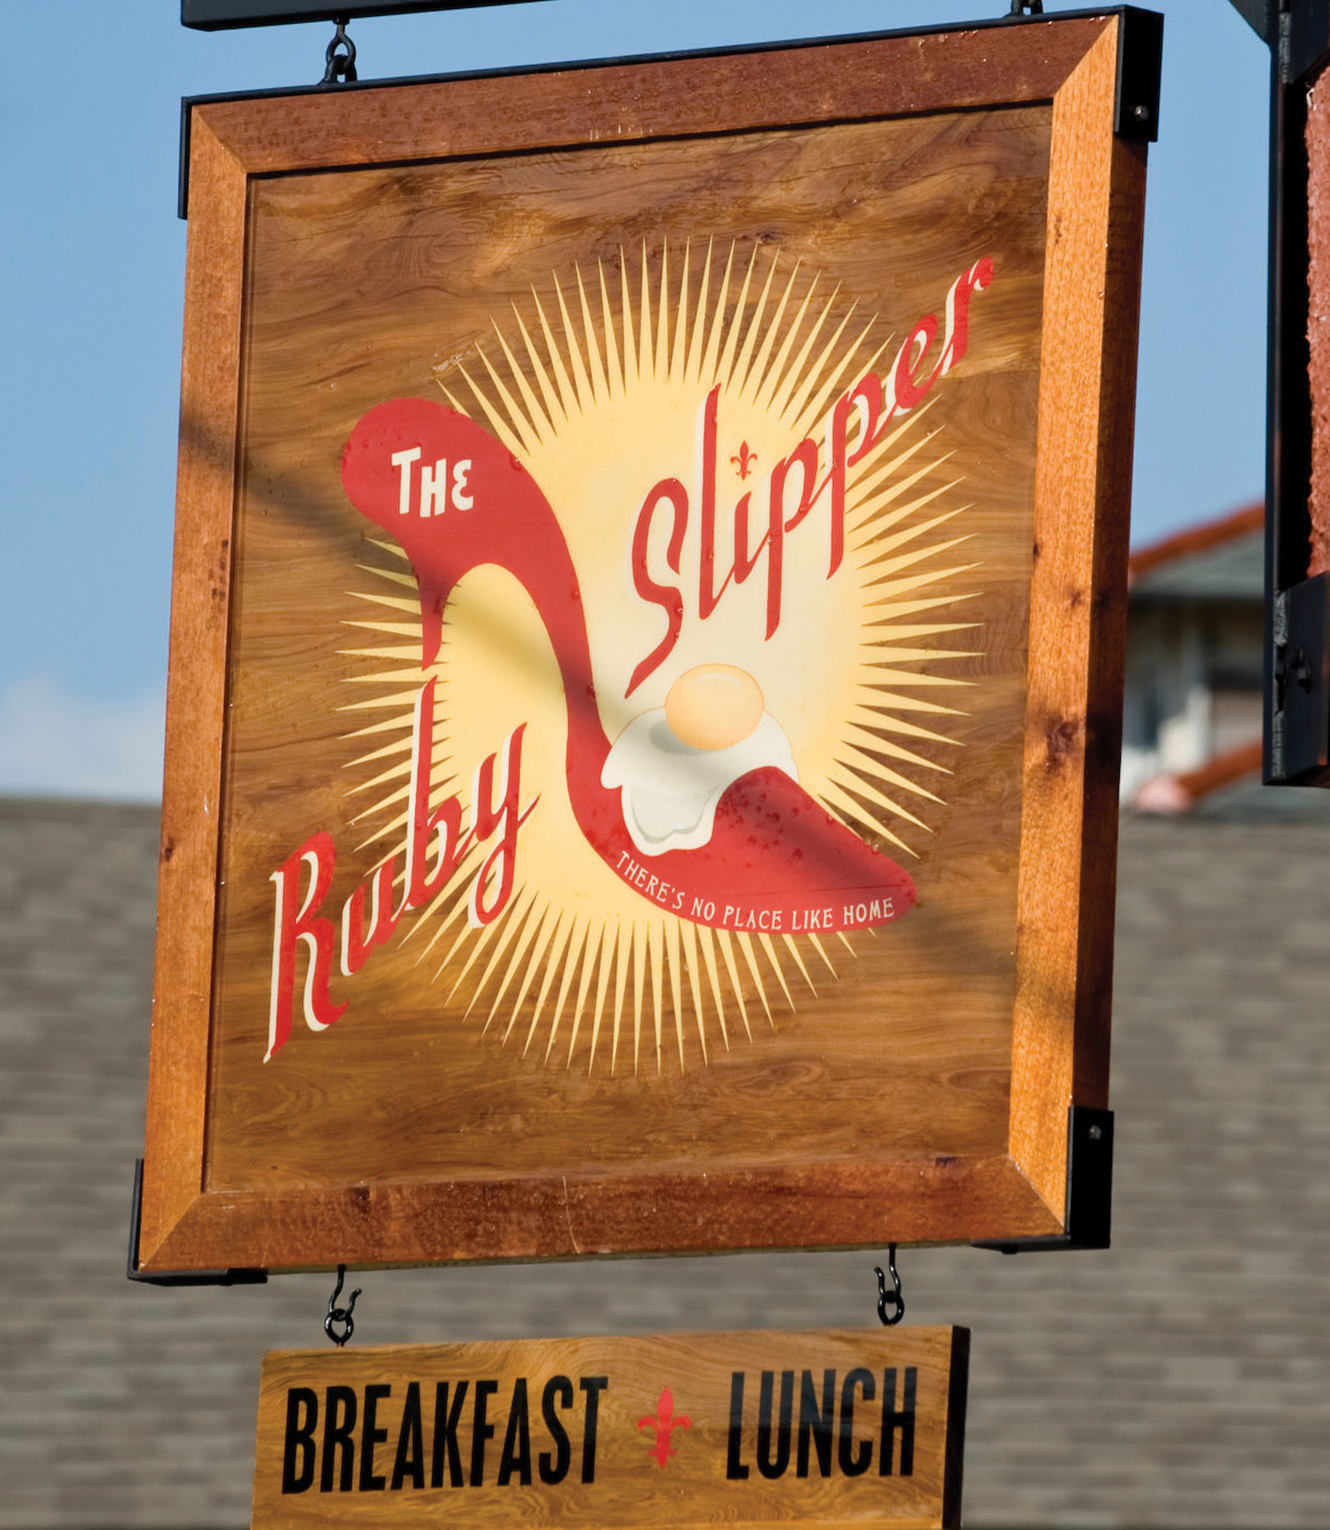 The Ruby Slipper breakfast and lunch restaurant sign in New Orleans